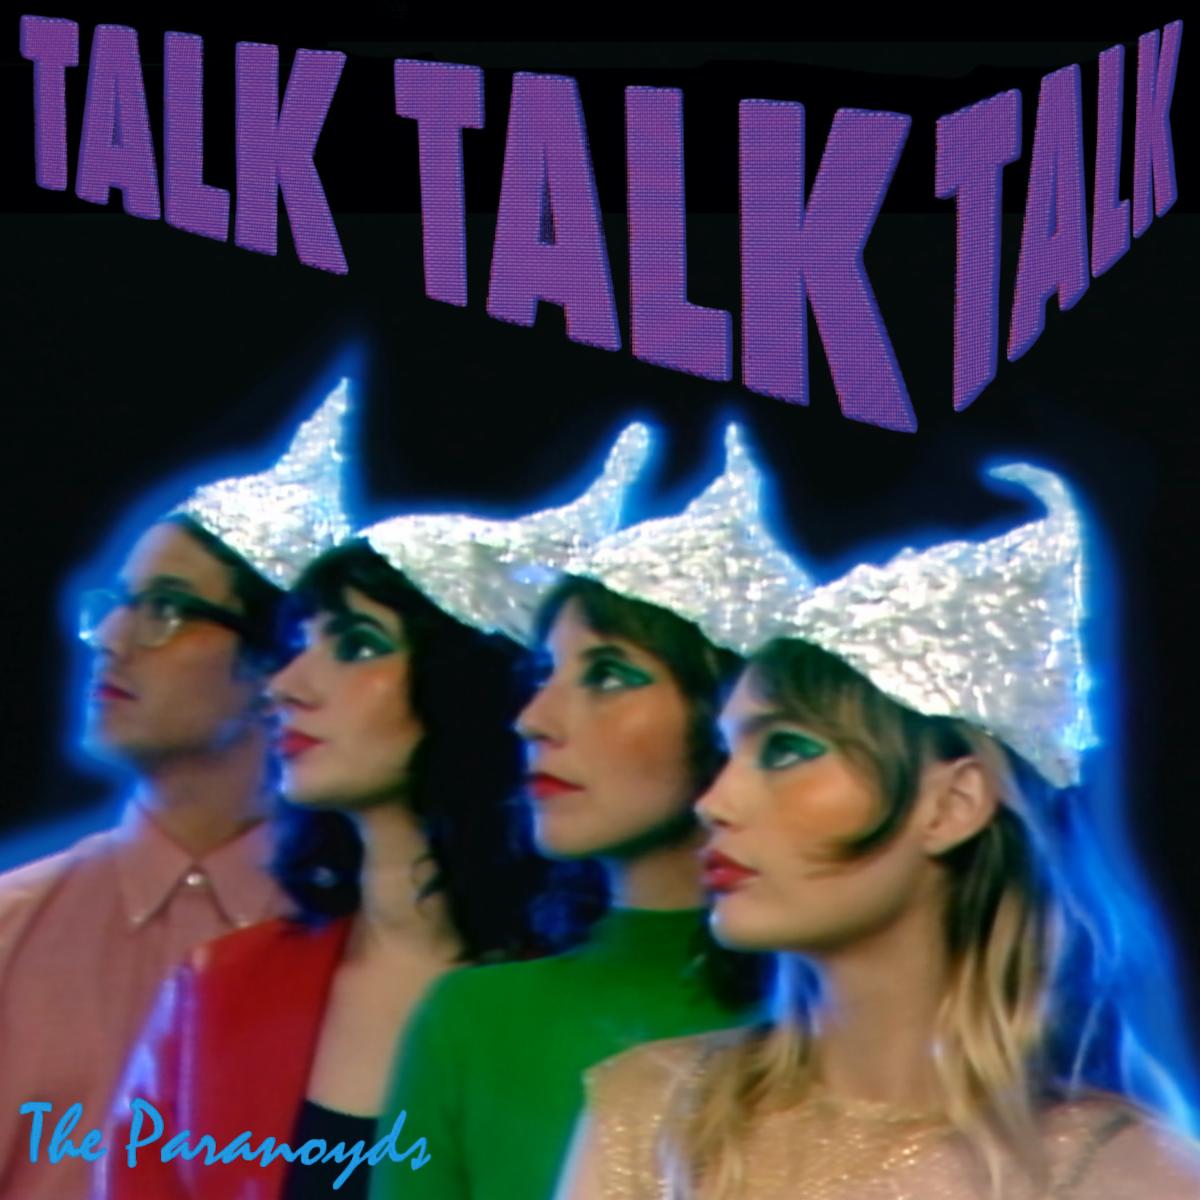 You are currently viewing The Paranoyds announce new LP Talk, Talk, Talk; share first track/video ‘Lizzie’